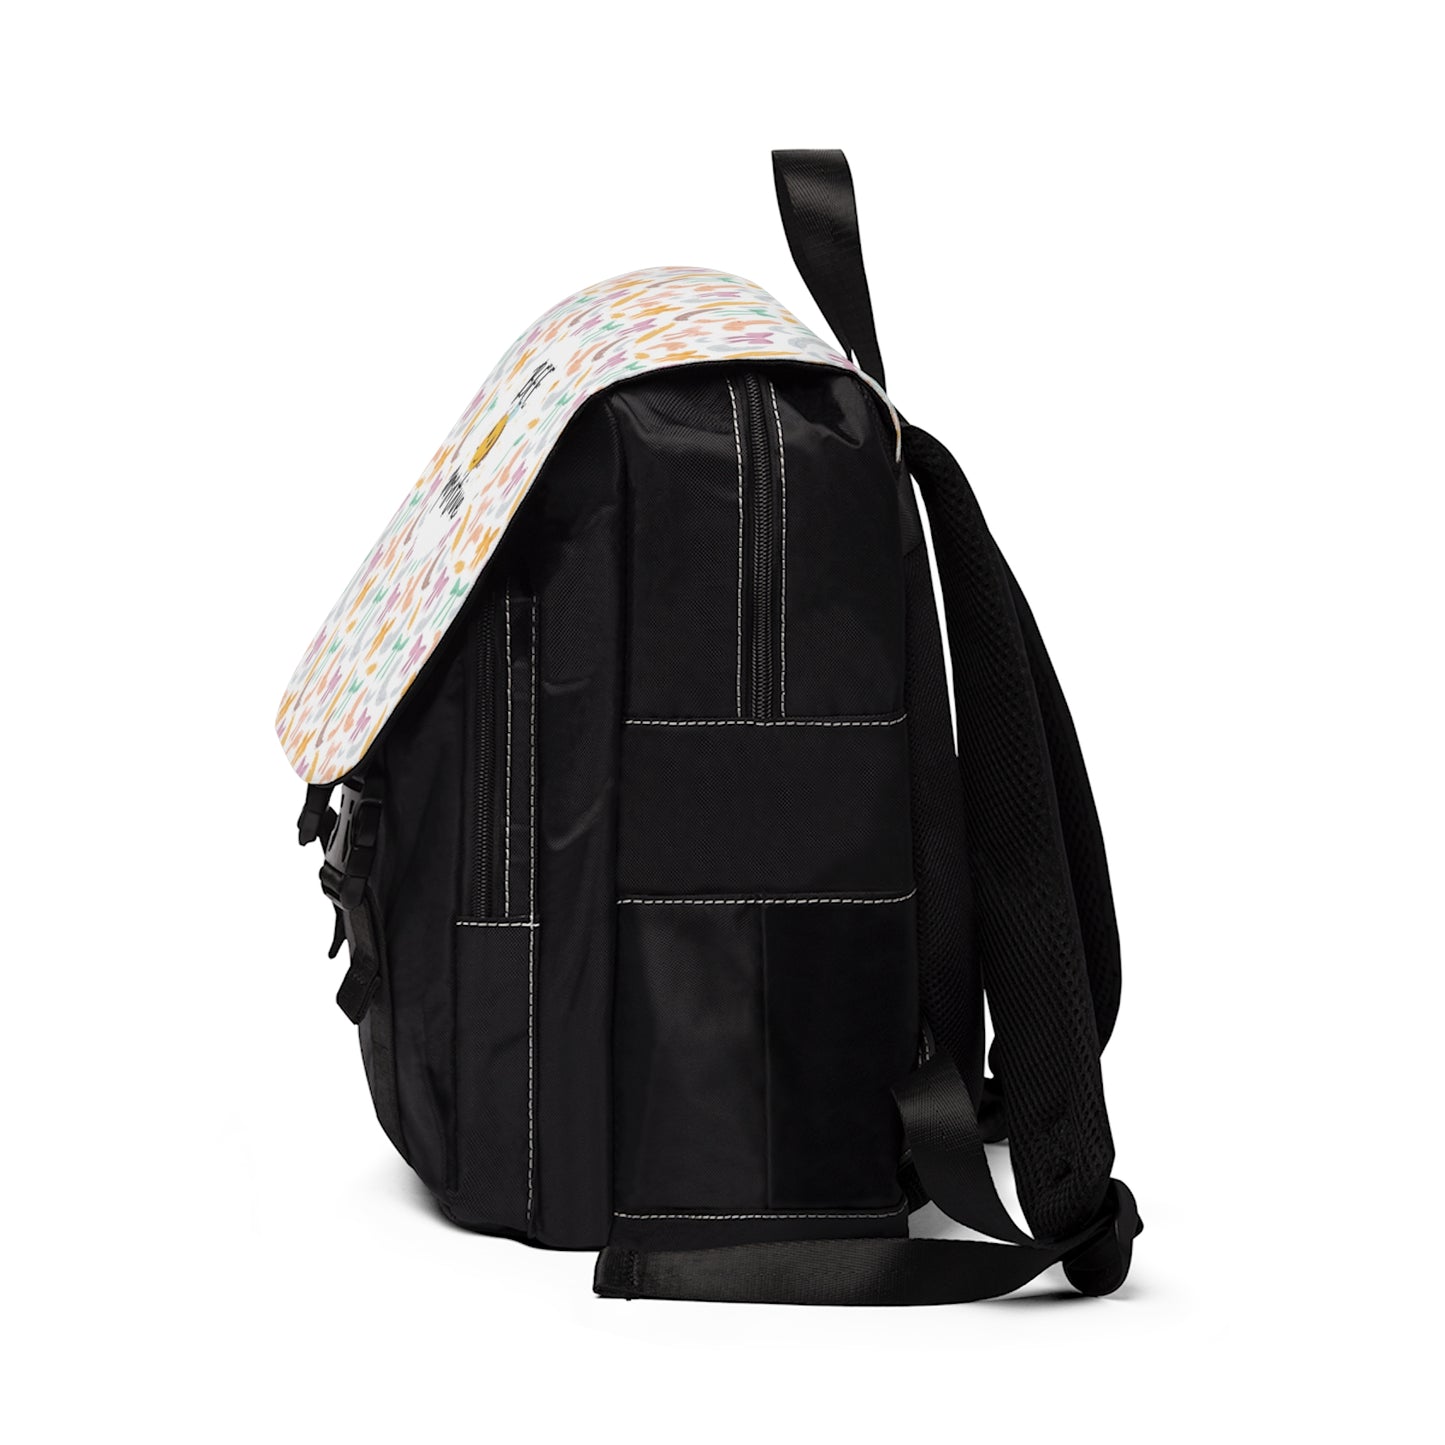 Niccie Stylish Unisex Casual Shoulder Backpack: Bee Positive